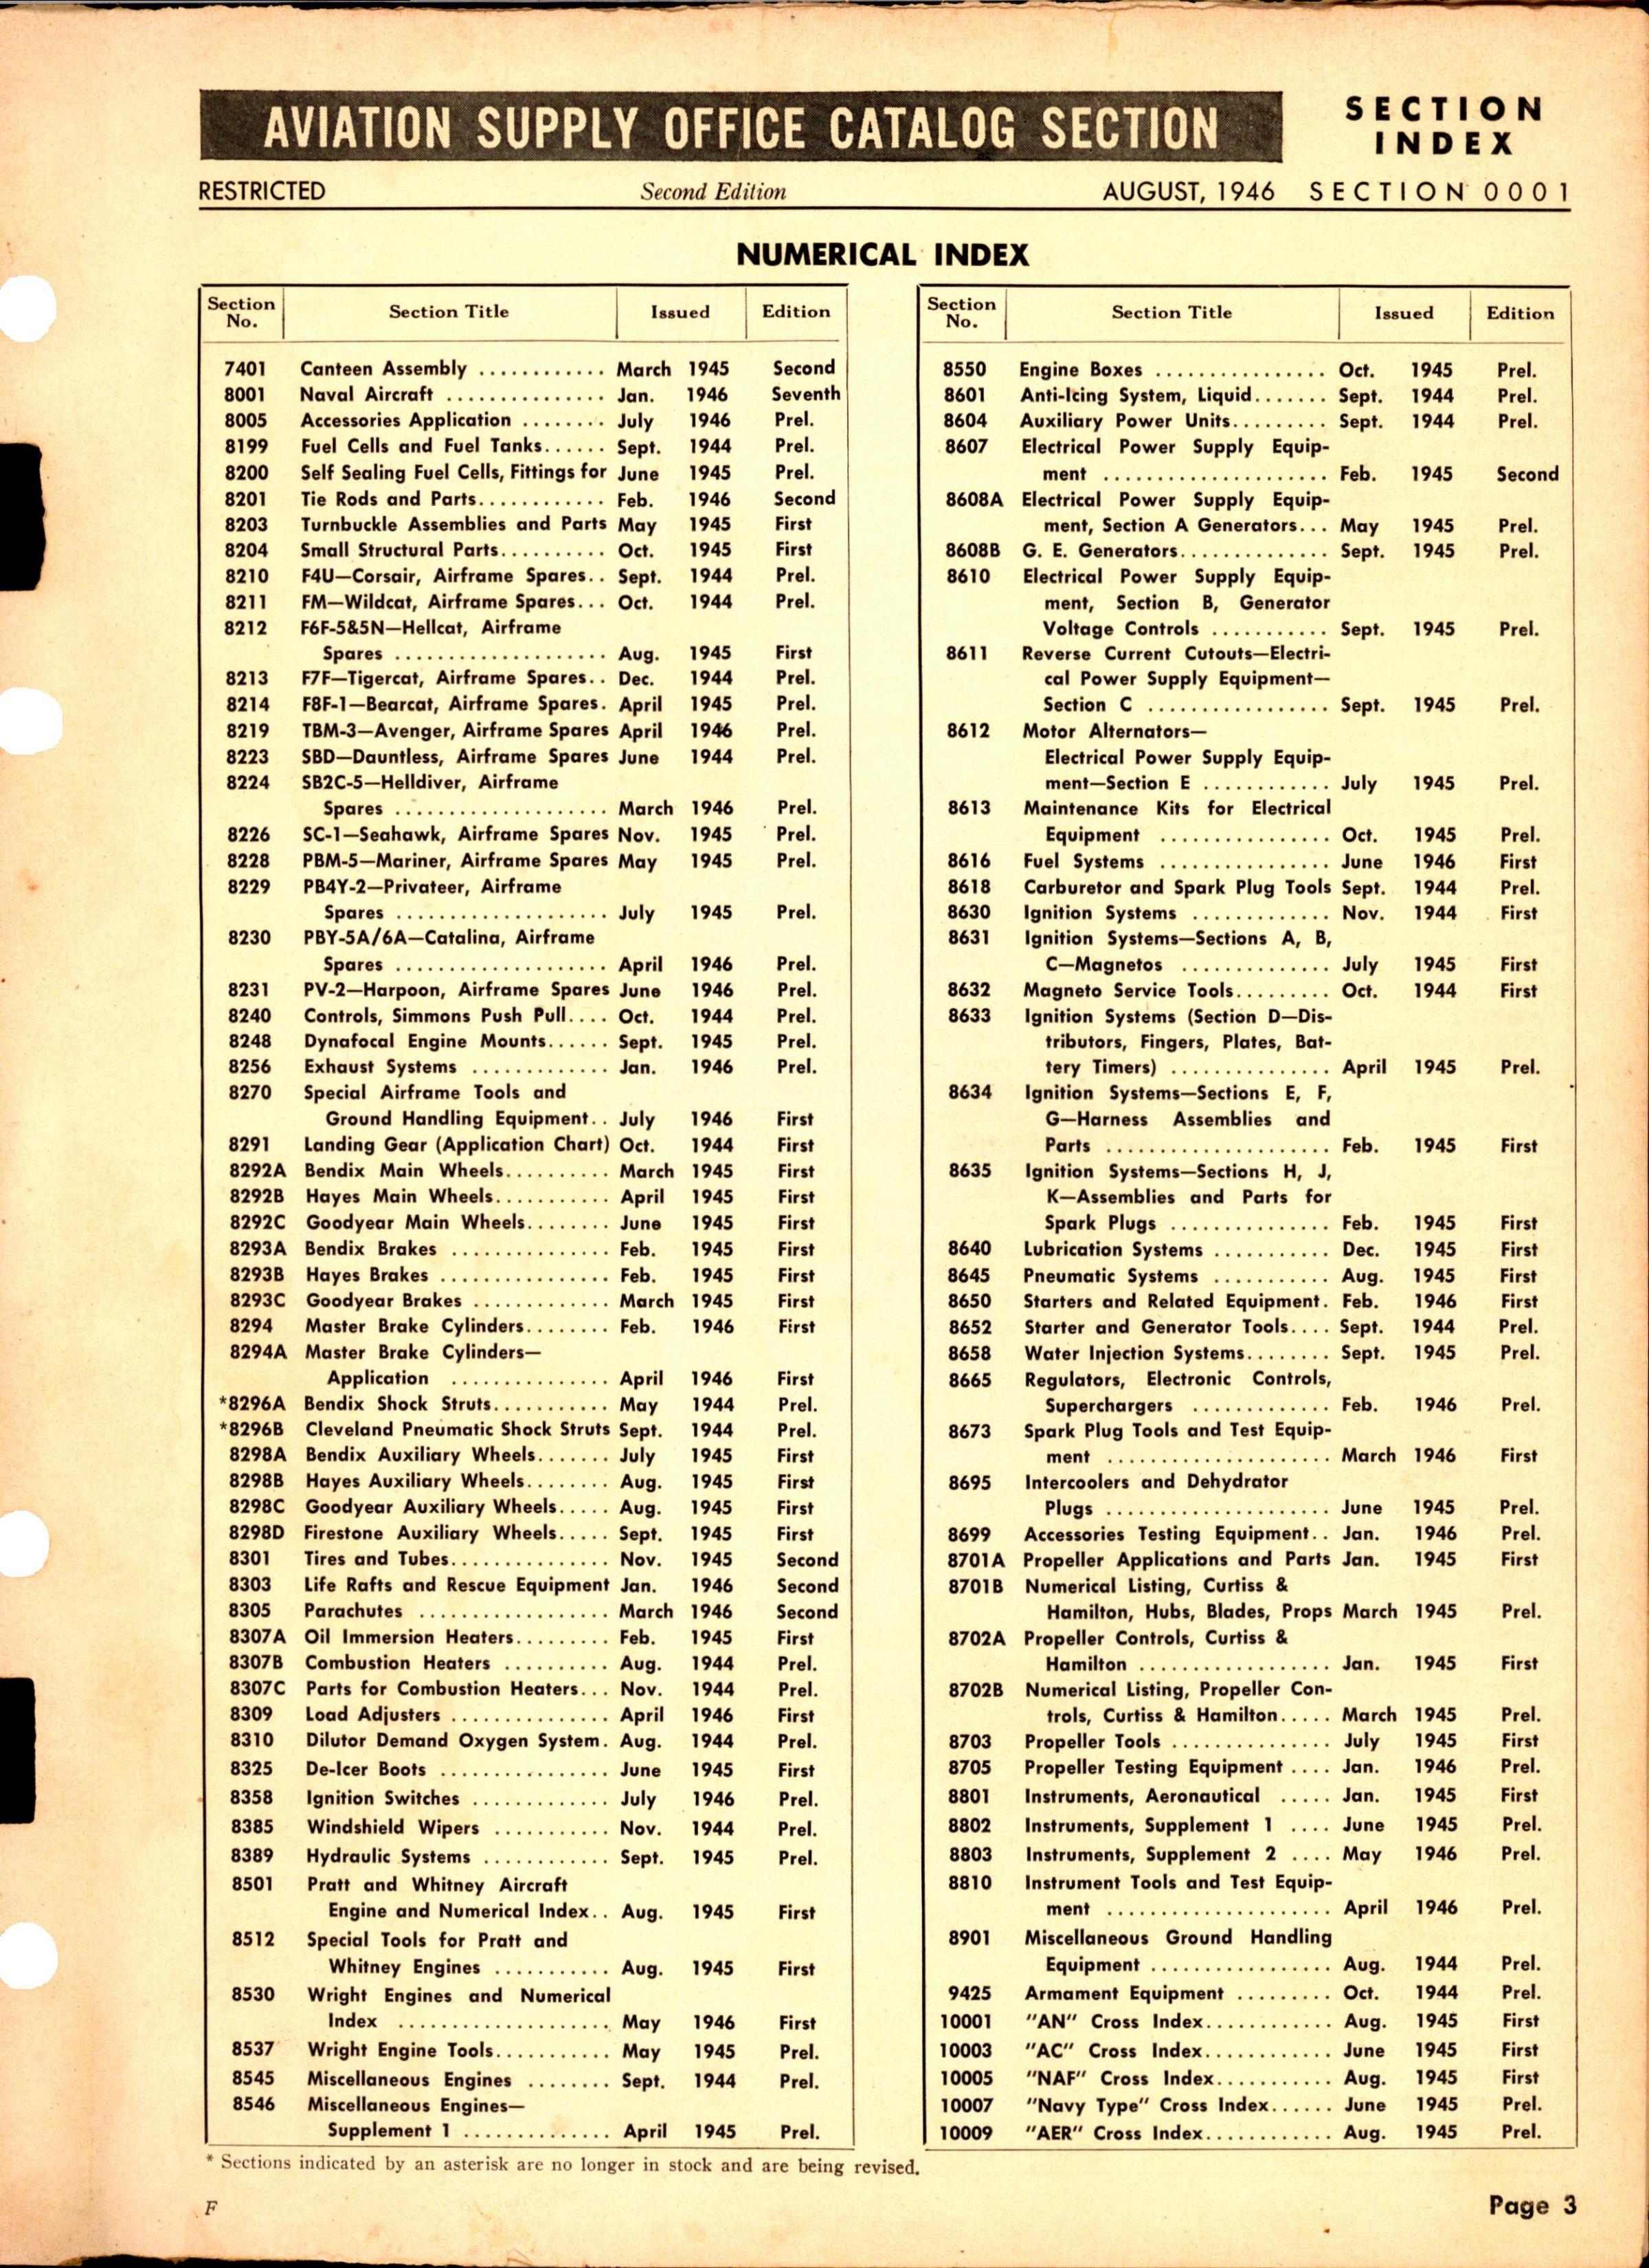 Sample page 3 from AirCorps Library document: Section Index